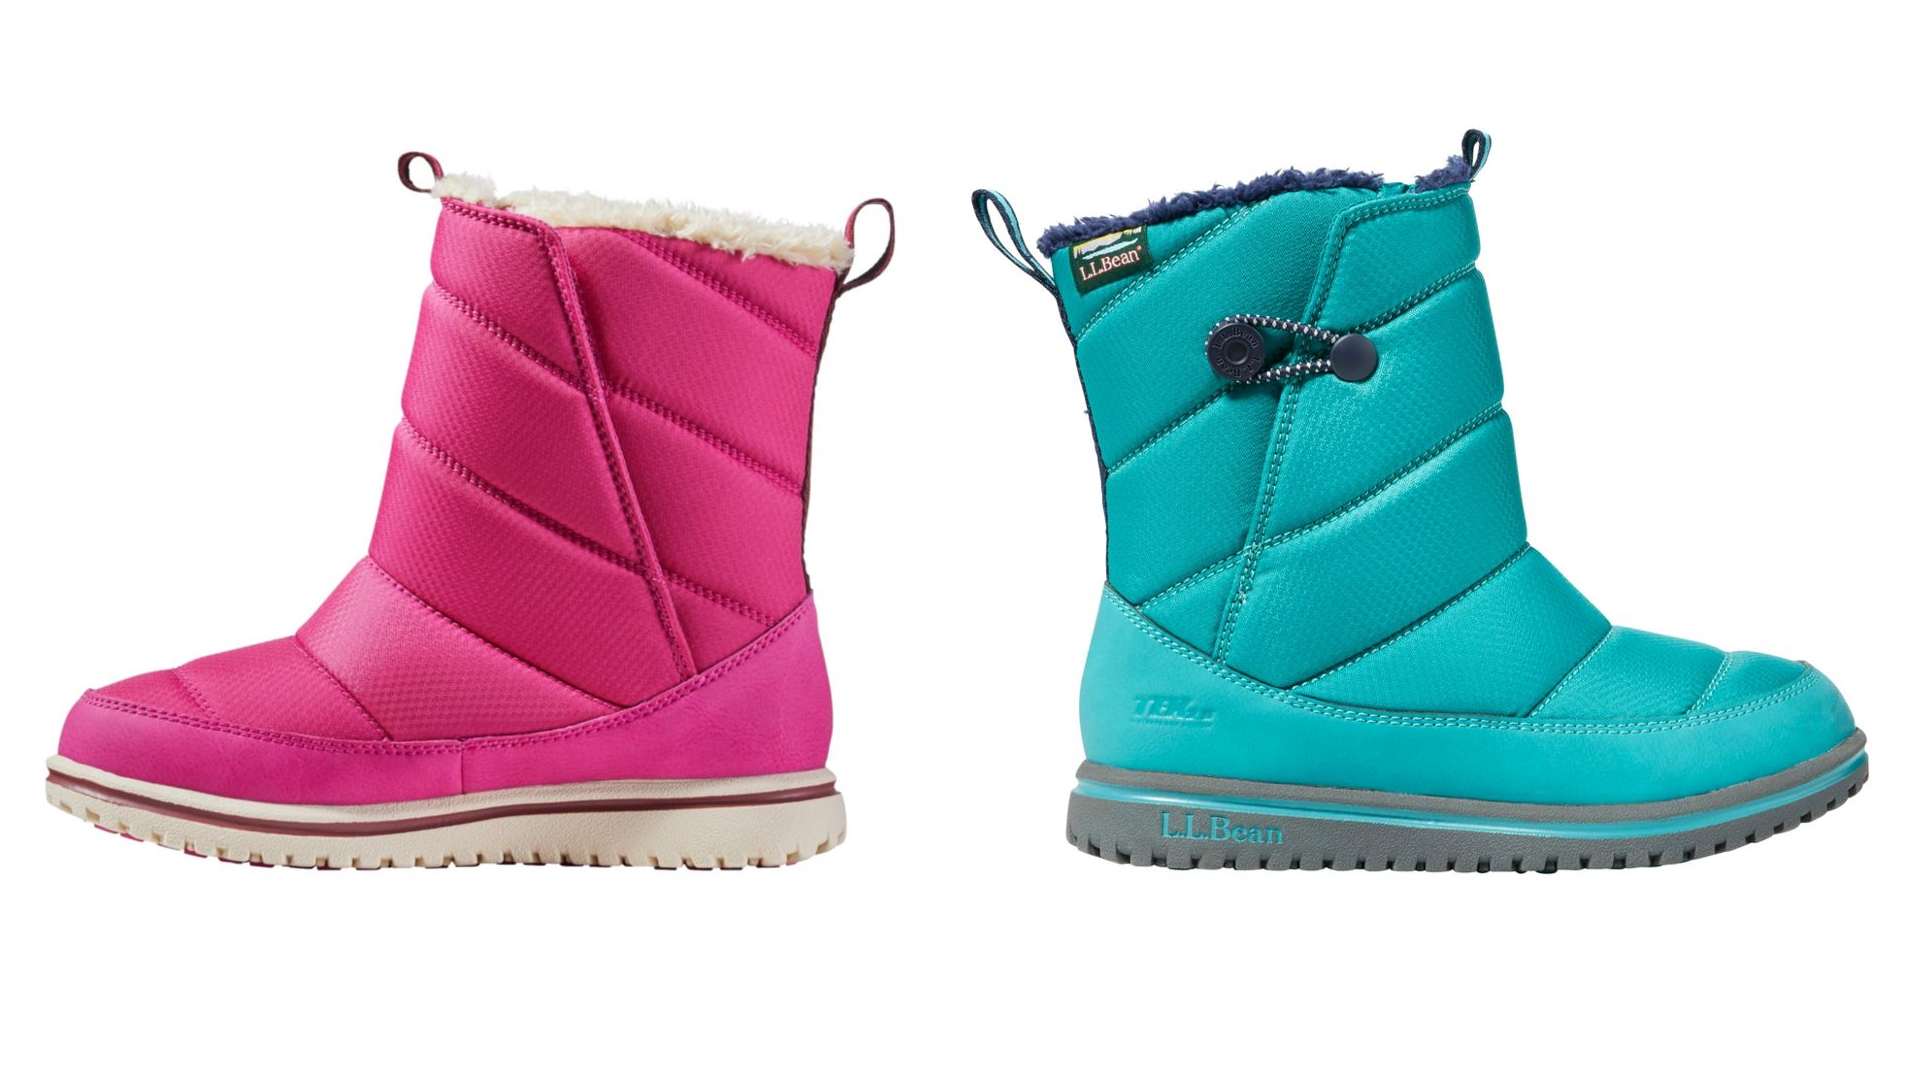 snow boots in colors